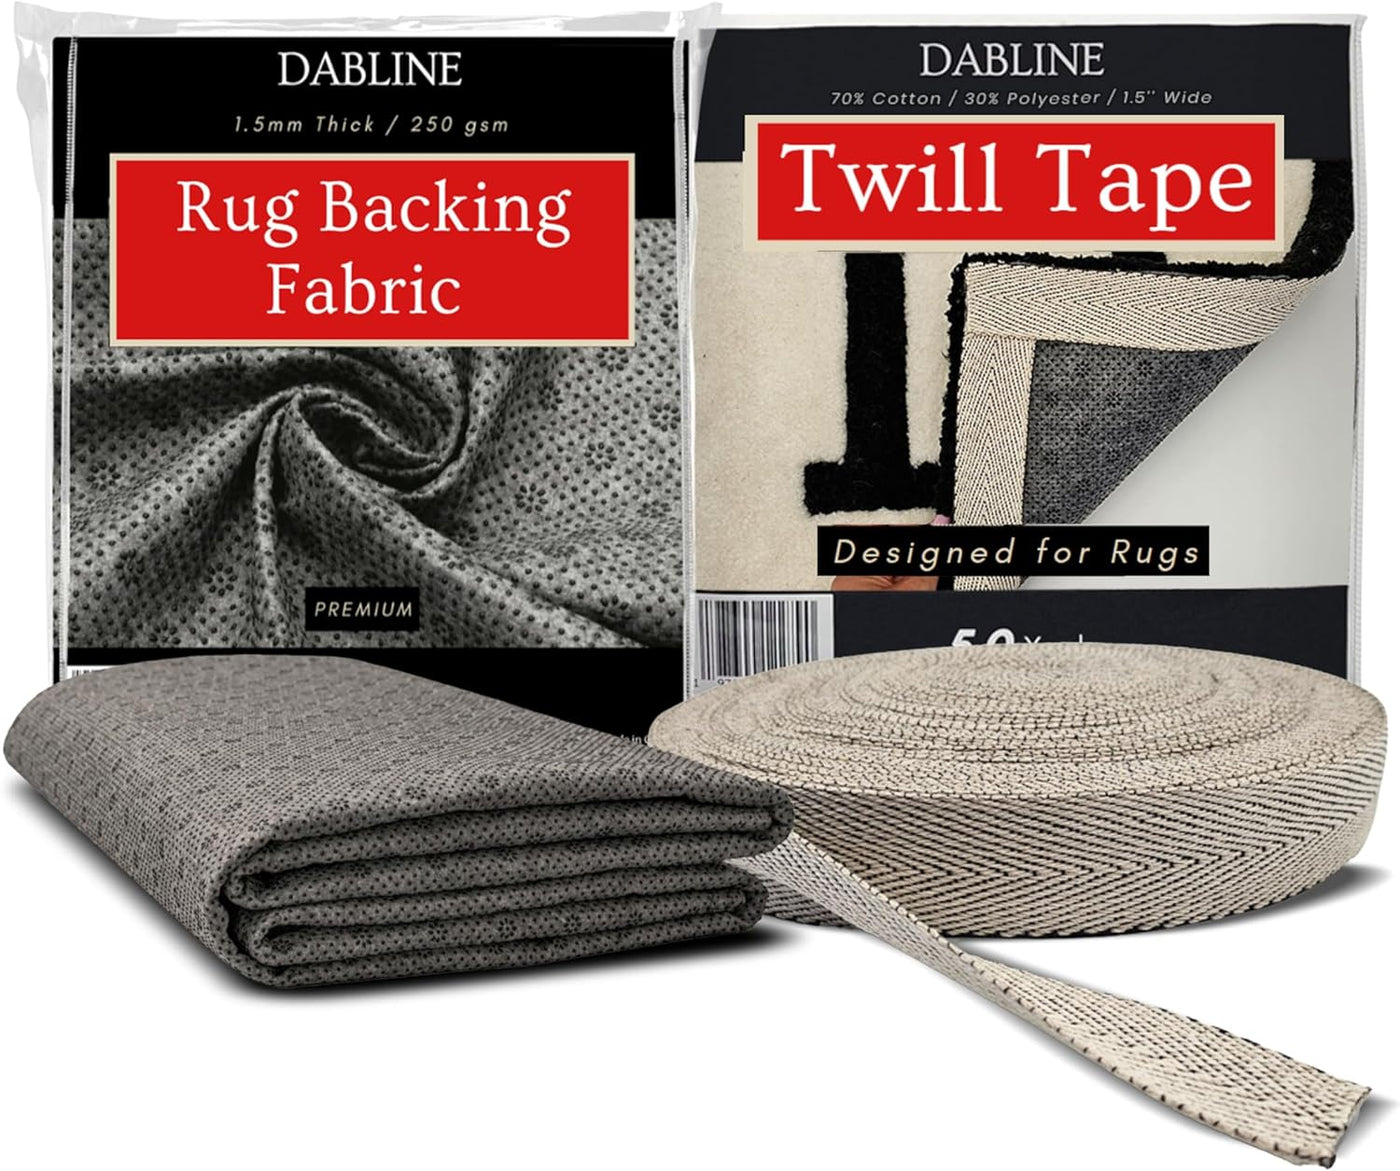 Bundle - Backing Fabric and Twill Tape